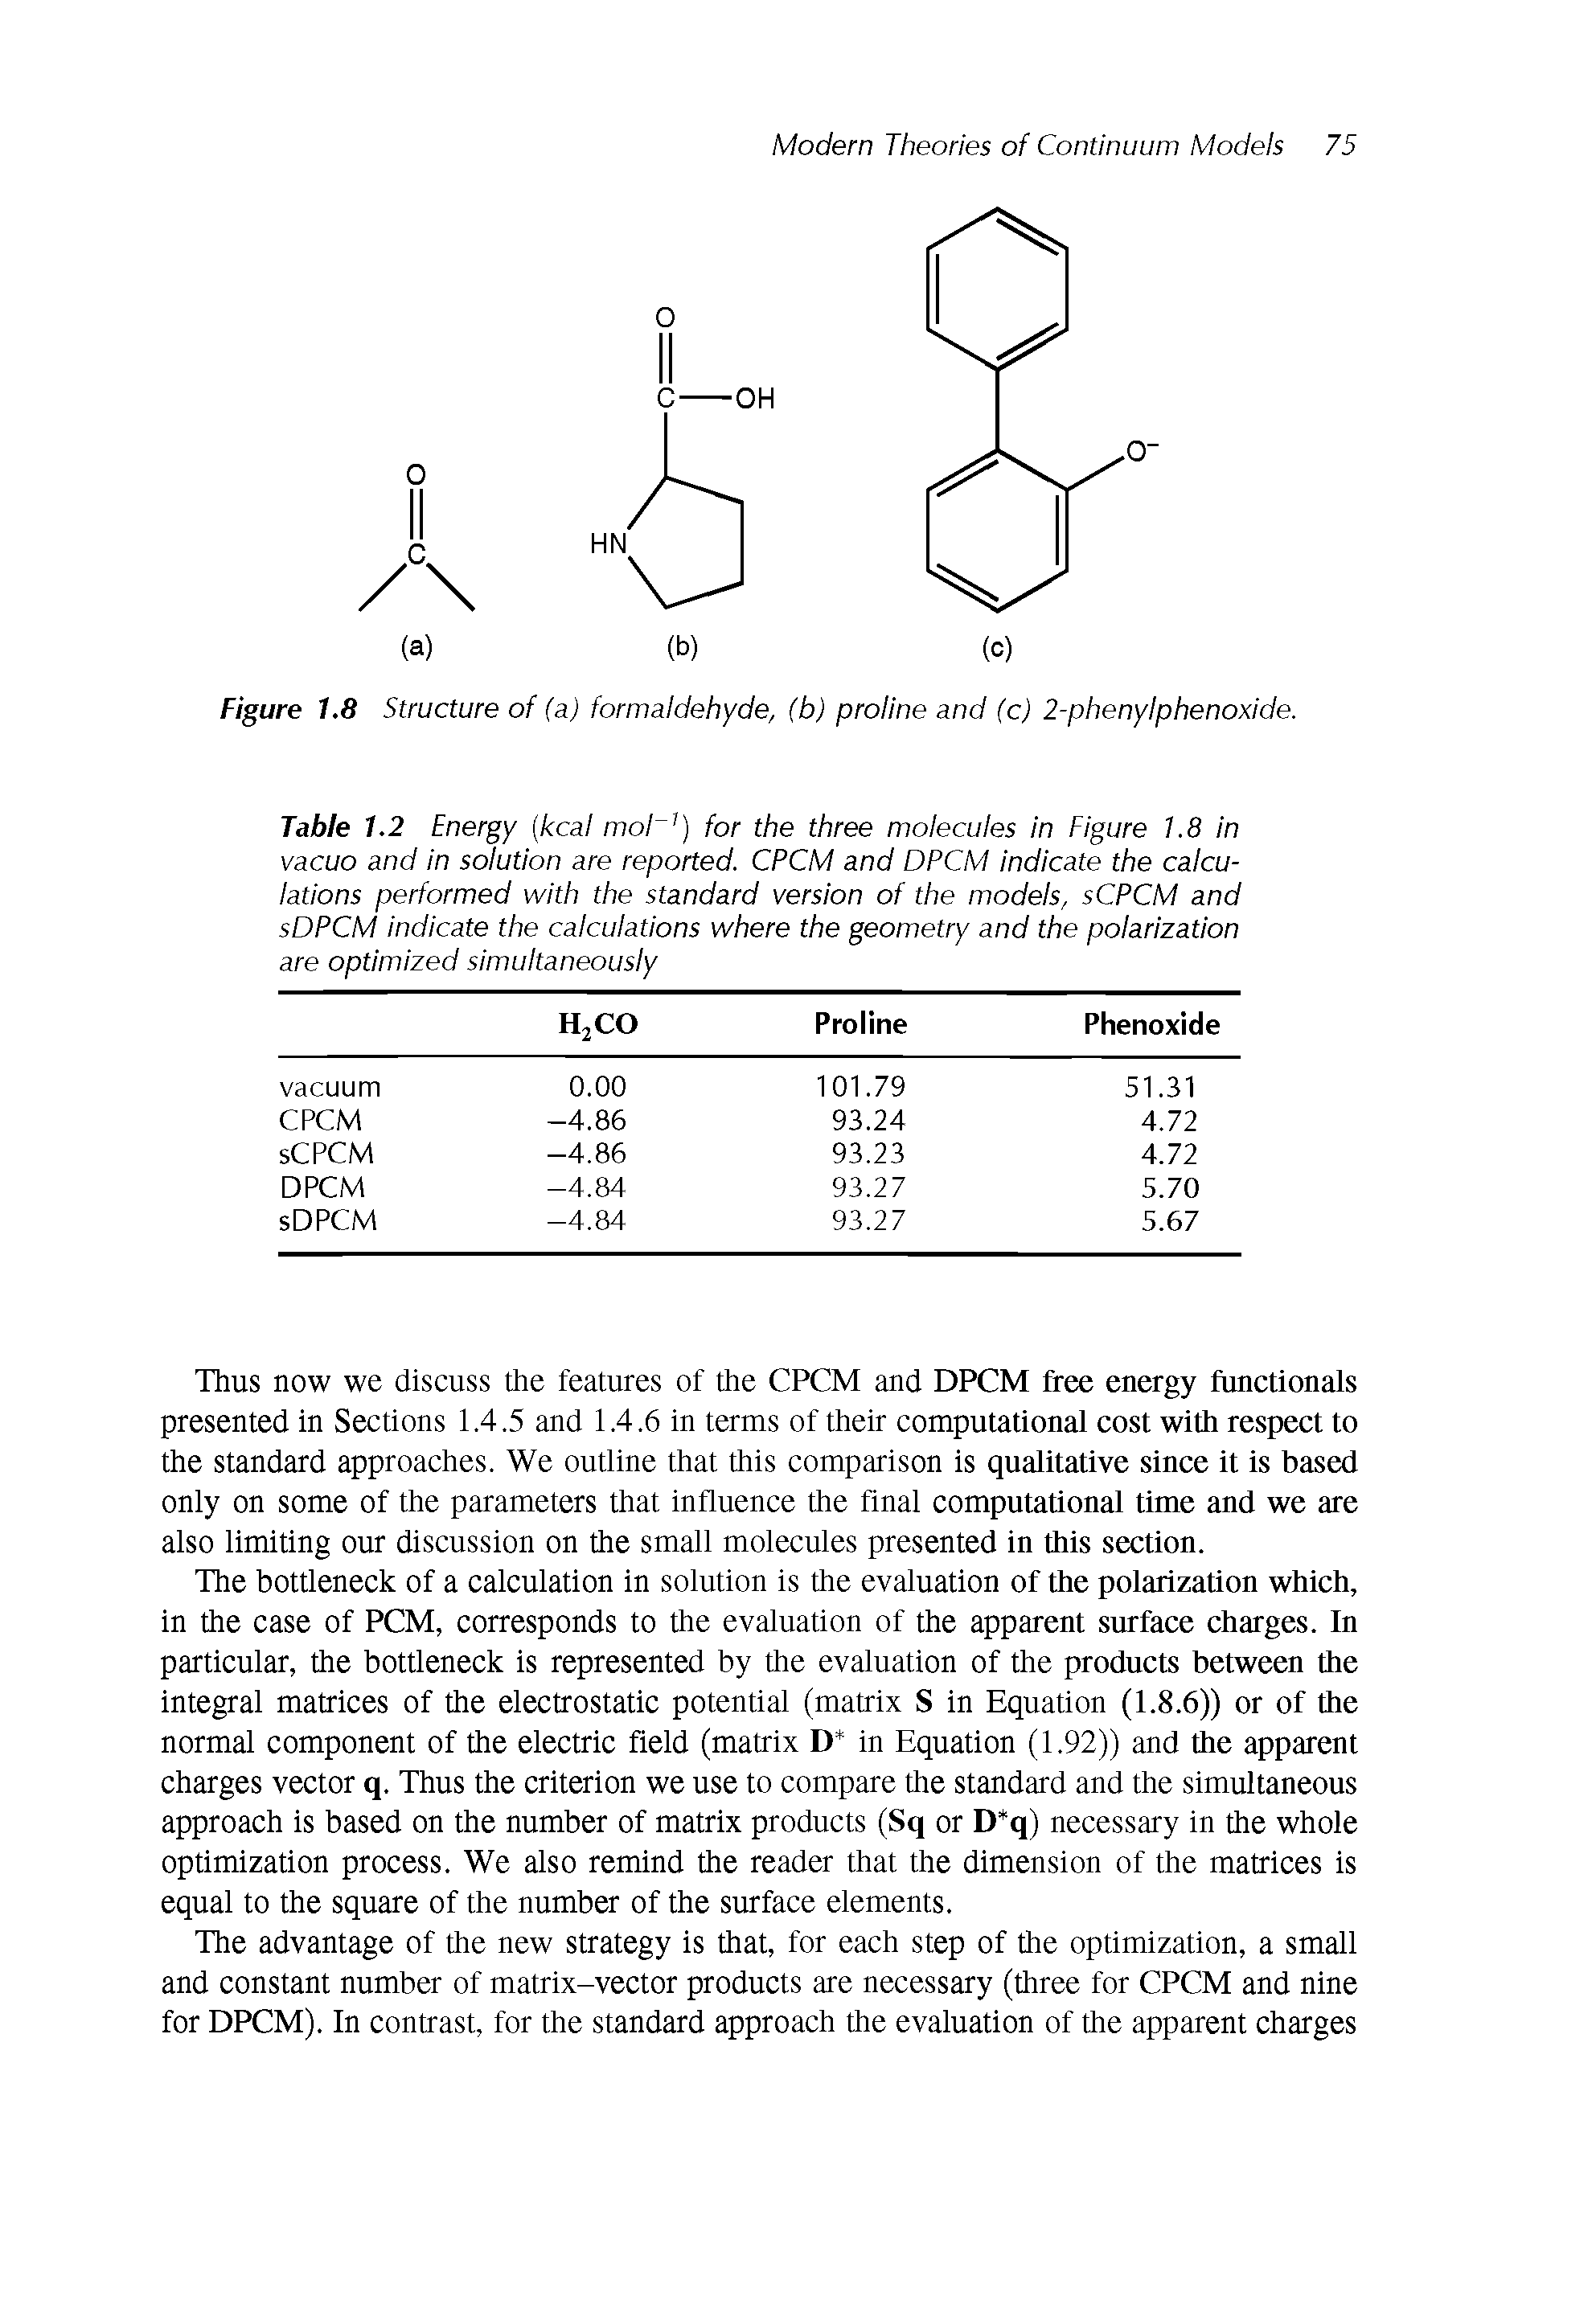 Table 1.2 Energy (kcal moC1) for the three molecules in Figure 1.8 in vacuo and in solution are reported. CPCM and DPCM indicate the calculations performed with the standard version of the models, sCPCM and sDPCM indicate the calculations where the geometry and the polarization are optimized simultaneously...